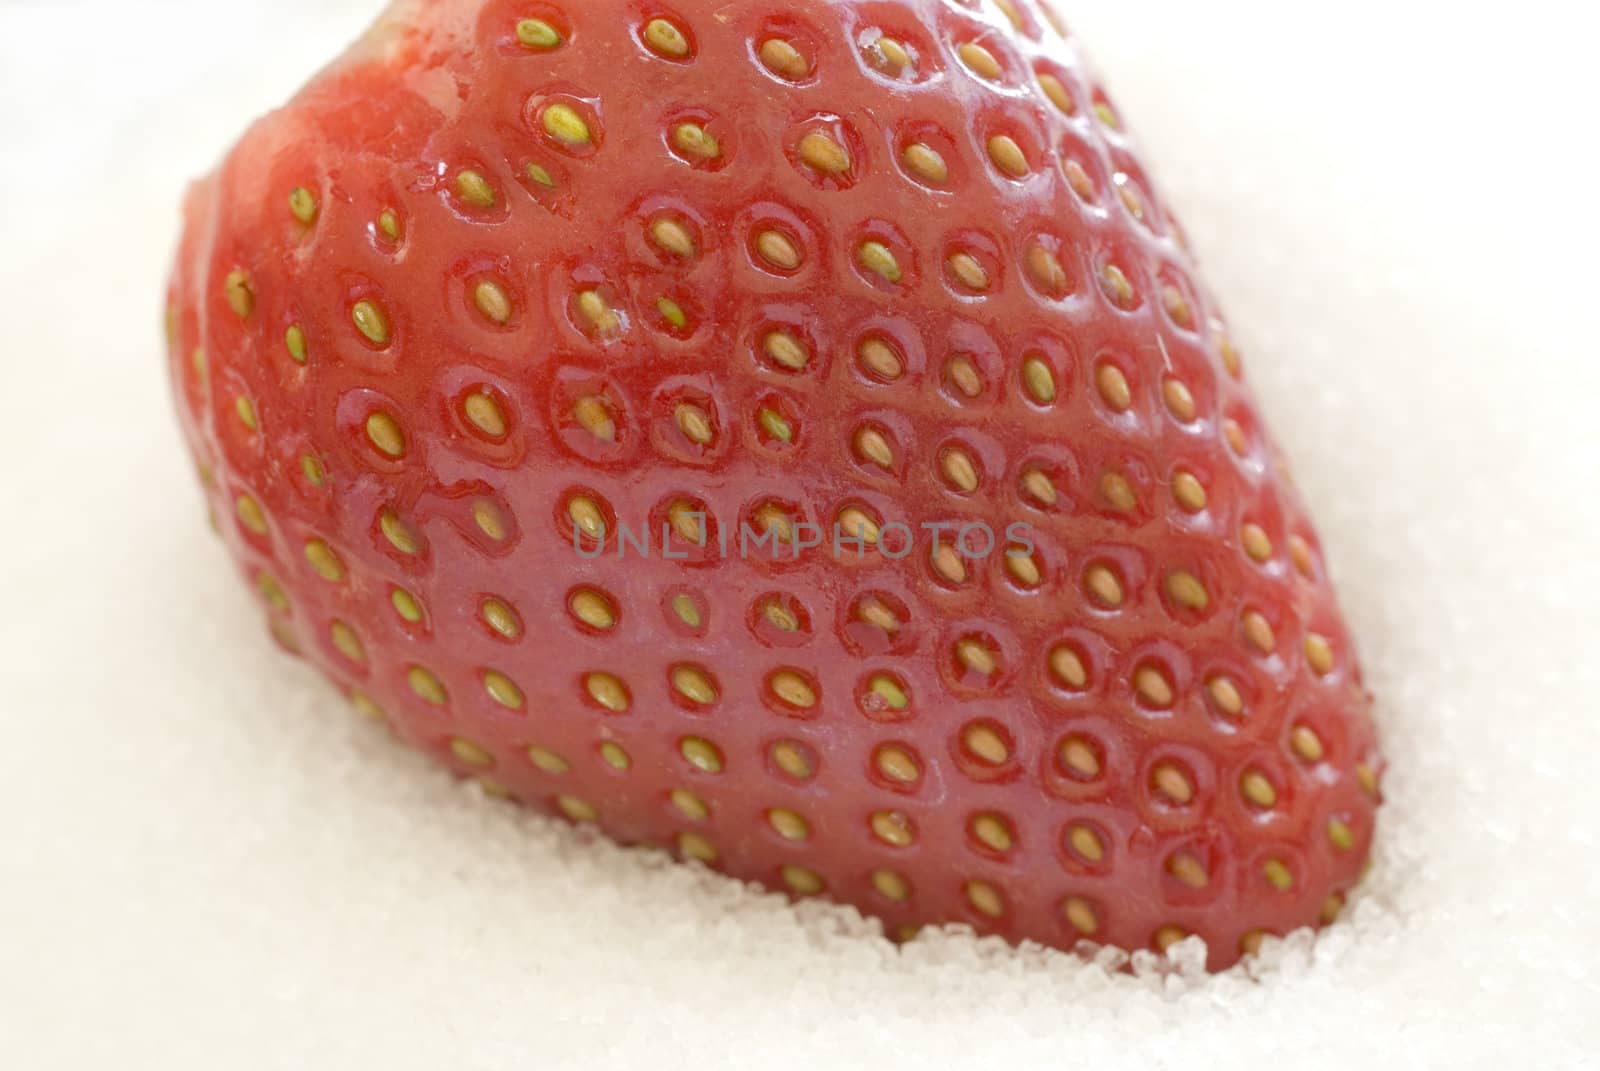 high key image of a single ripe strawberry on a bed of sugar granuals